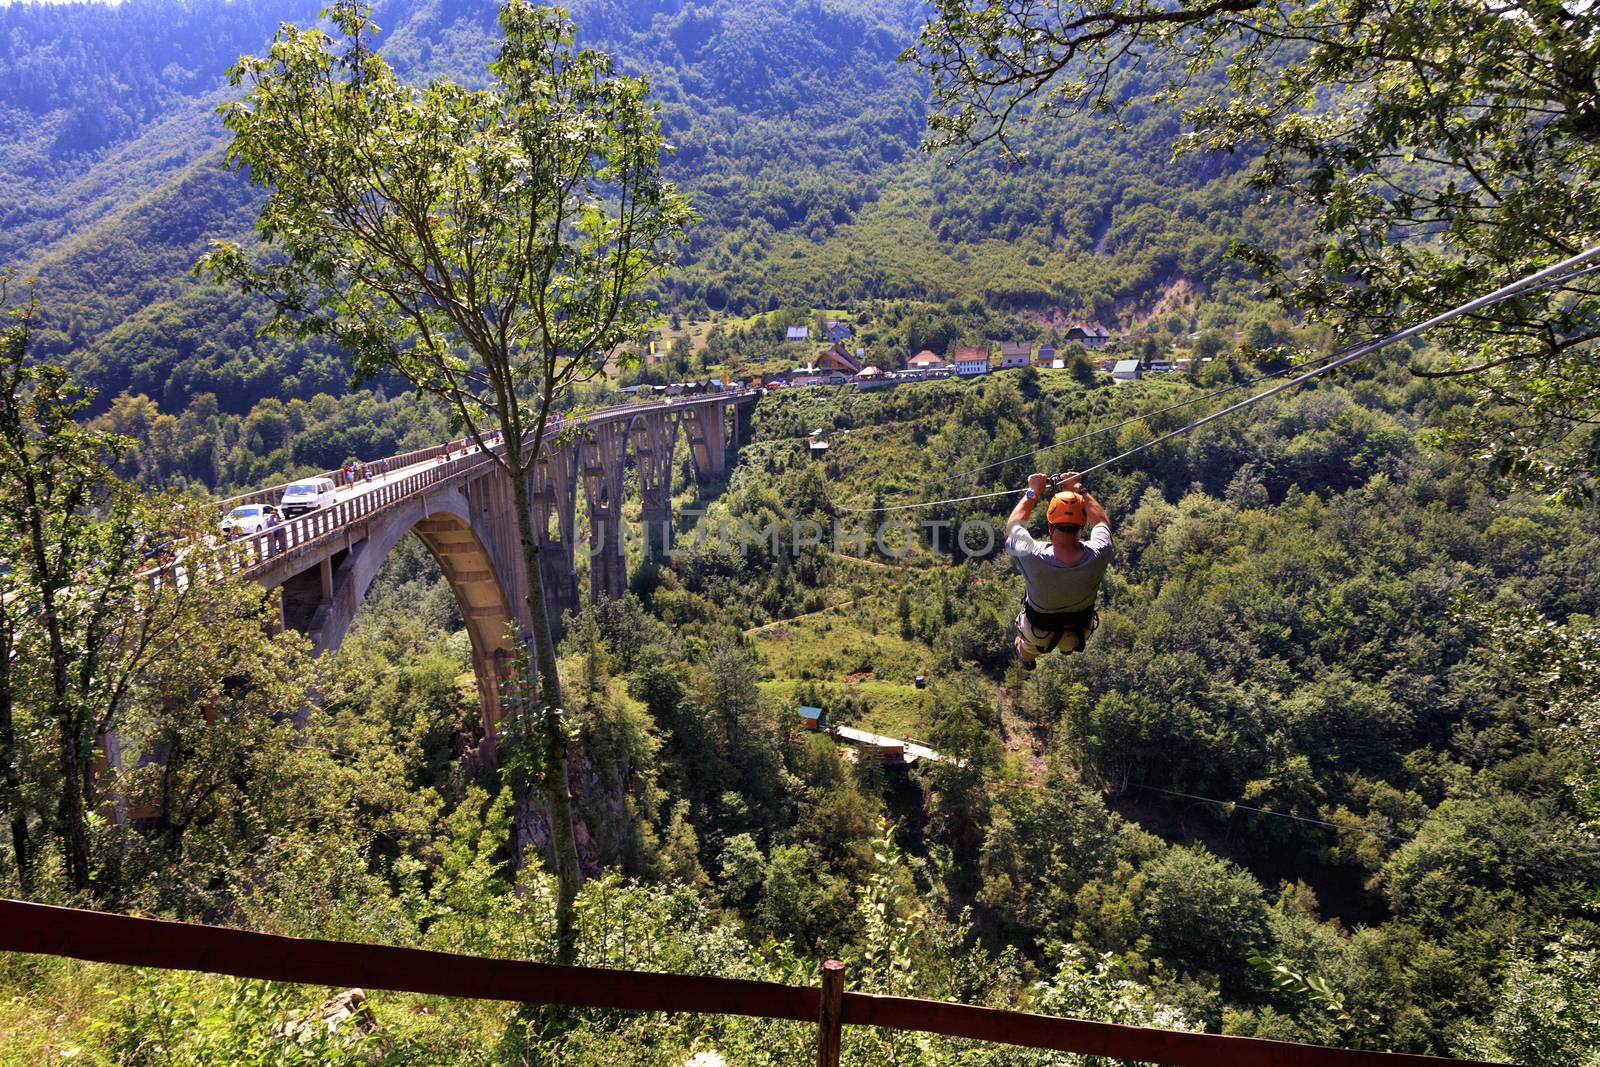 A man crosses over a long cable car over a mountain and forest across the Tiara River in Montenegro near the high stone bridge.